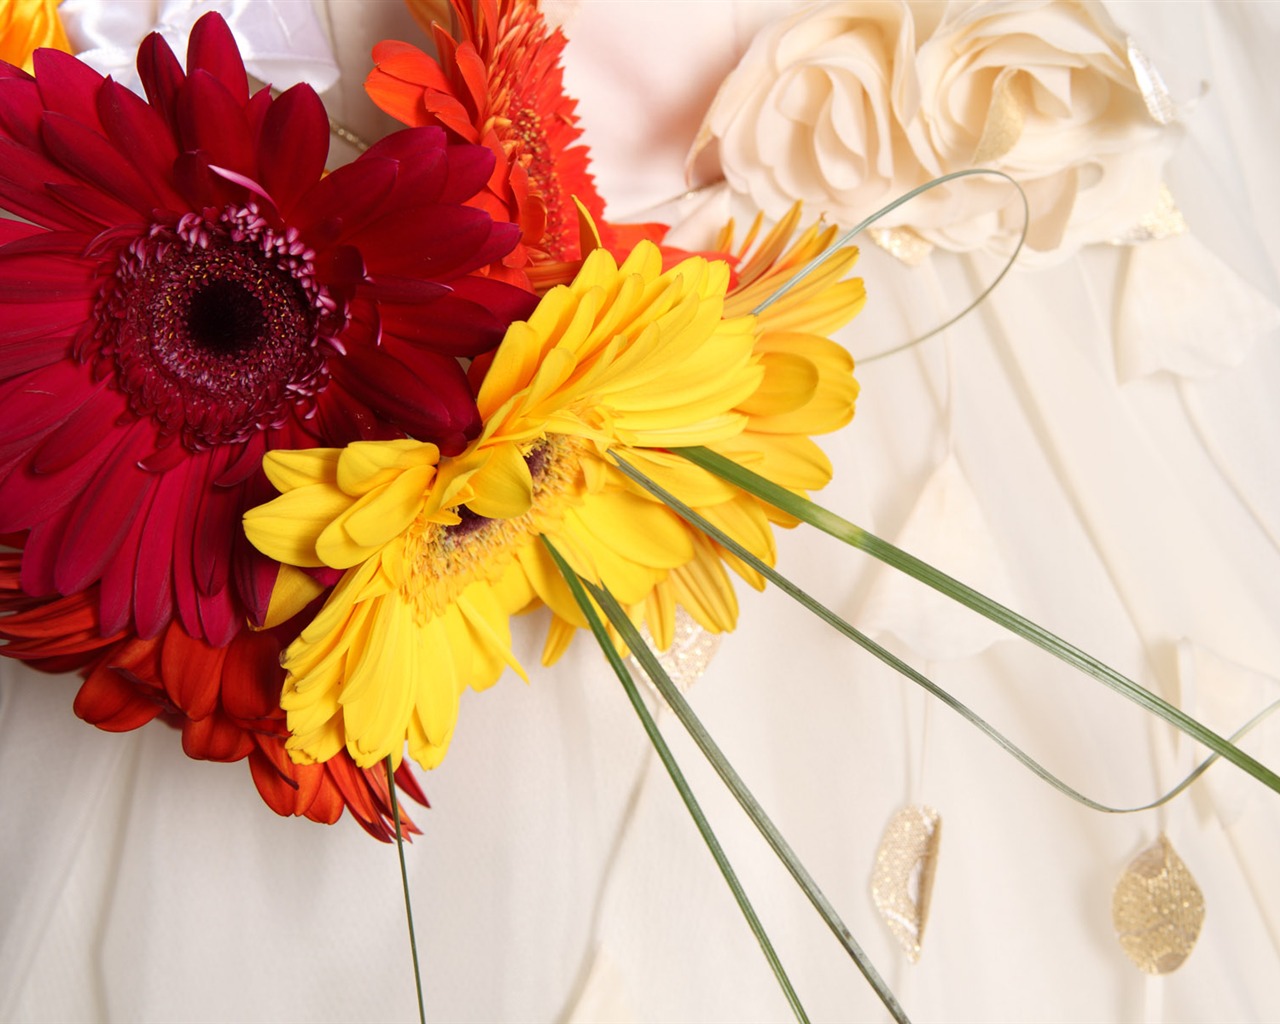 Weddings and Flowers wallpaper (2) #8 - 1280x1024